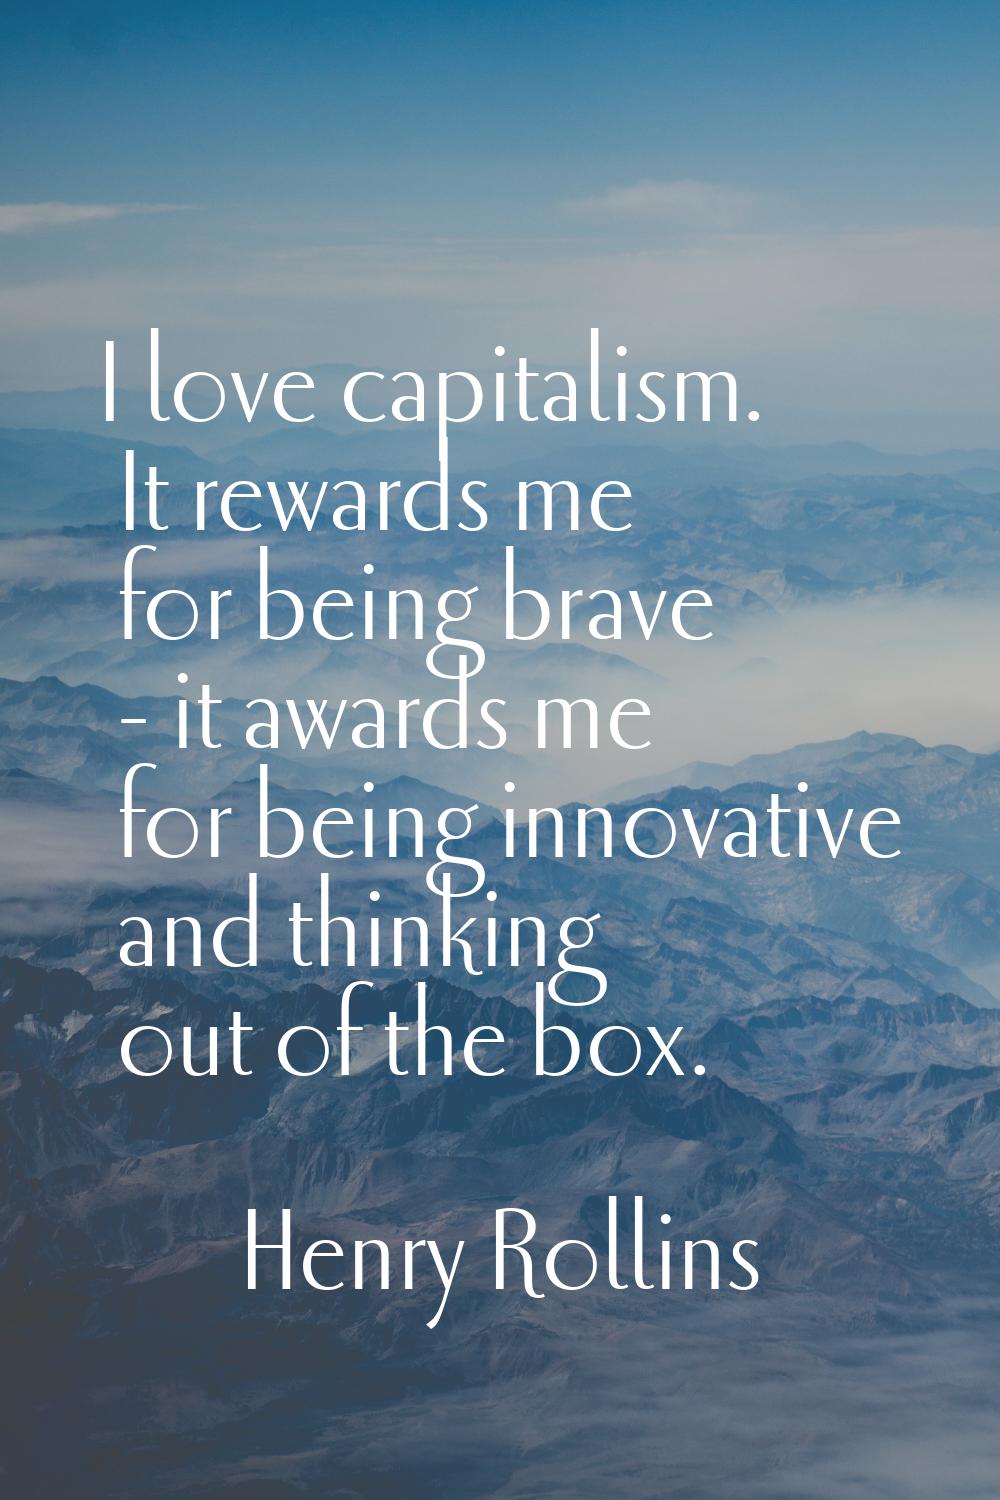 I love capitalism. It rewards me for being brave - it awards me for being innovative and thinking o